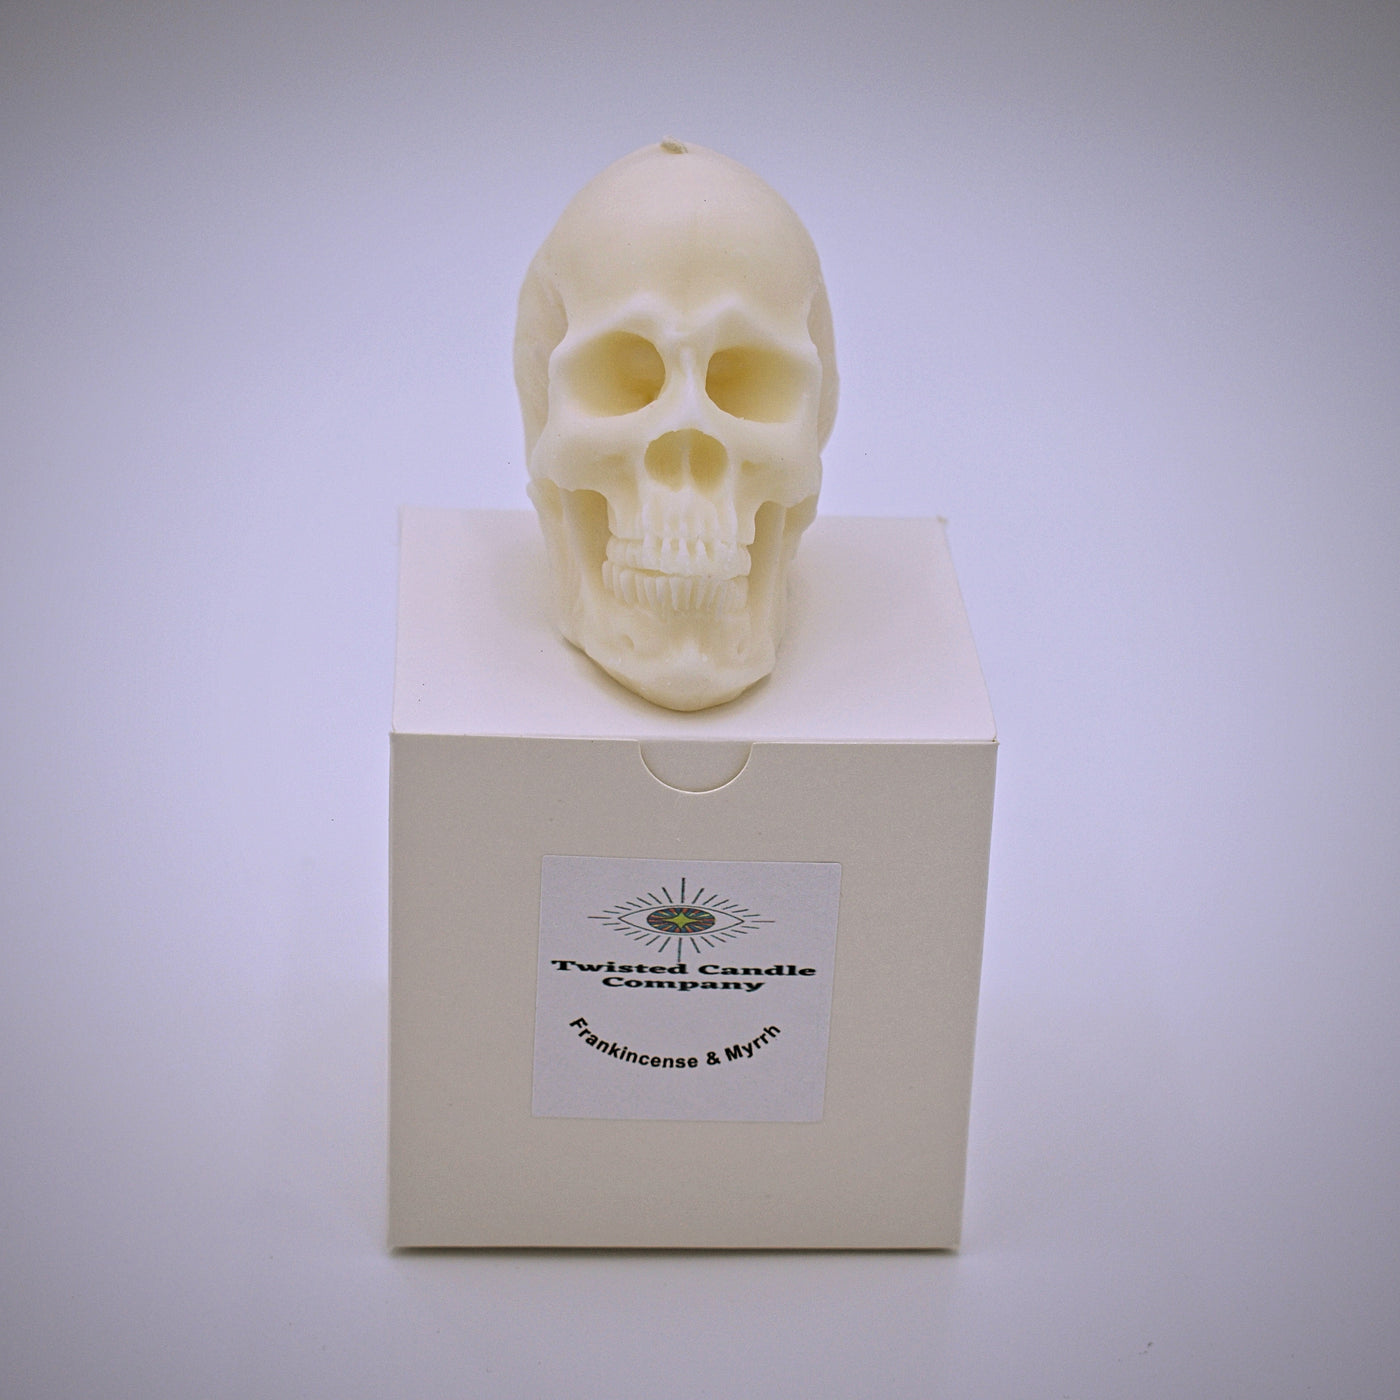 Scented Skull Shaped Soy Candle - The Cranio Collections